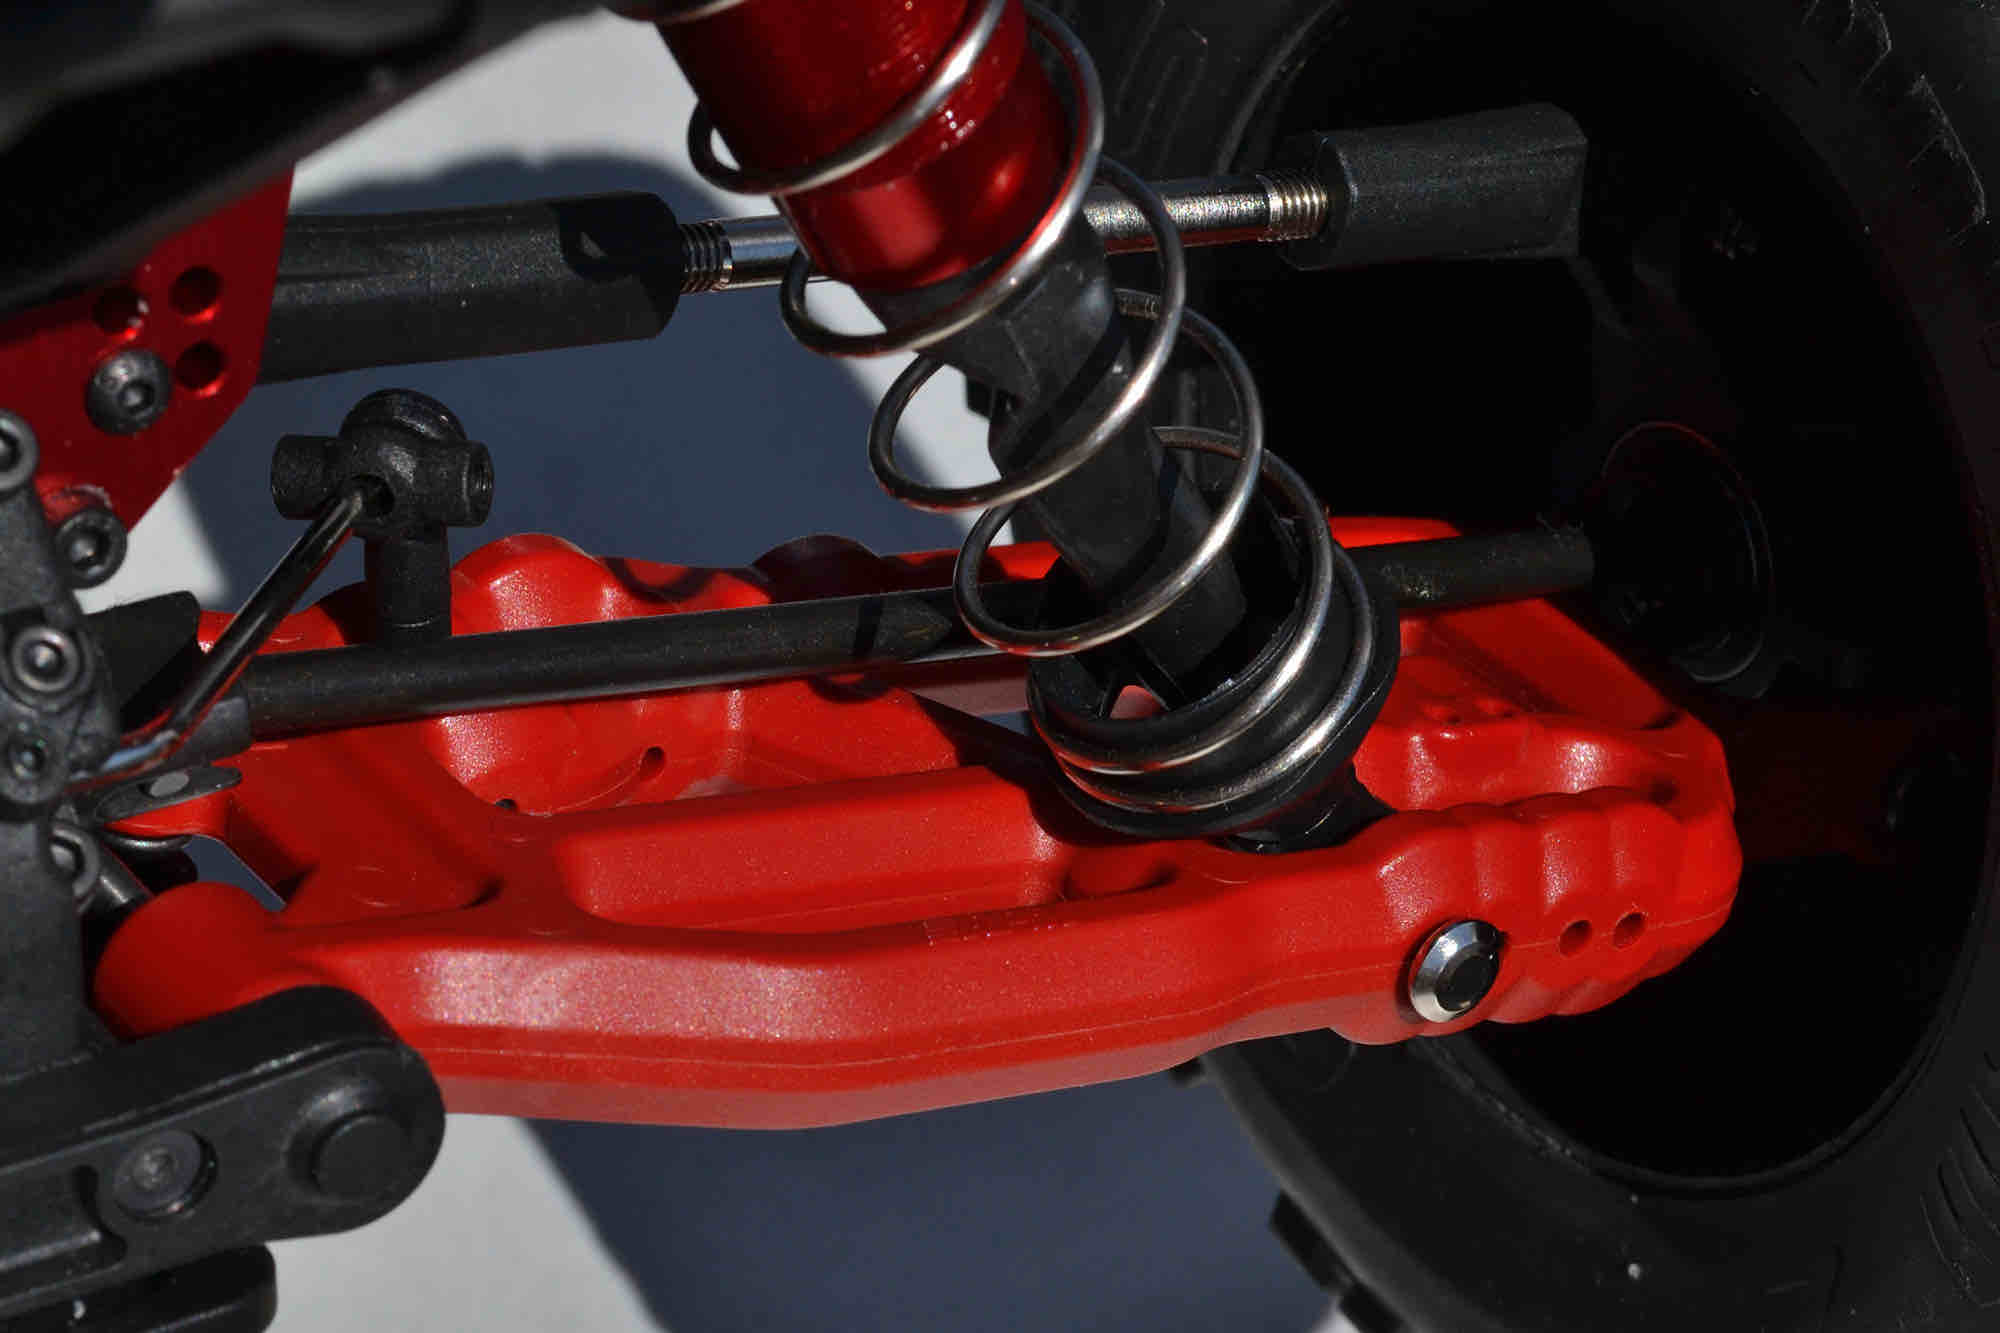 RPM Rear A-arms for the ARRMA 6S (V5 & EXB) line of Vehicles Red